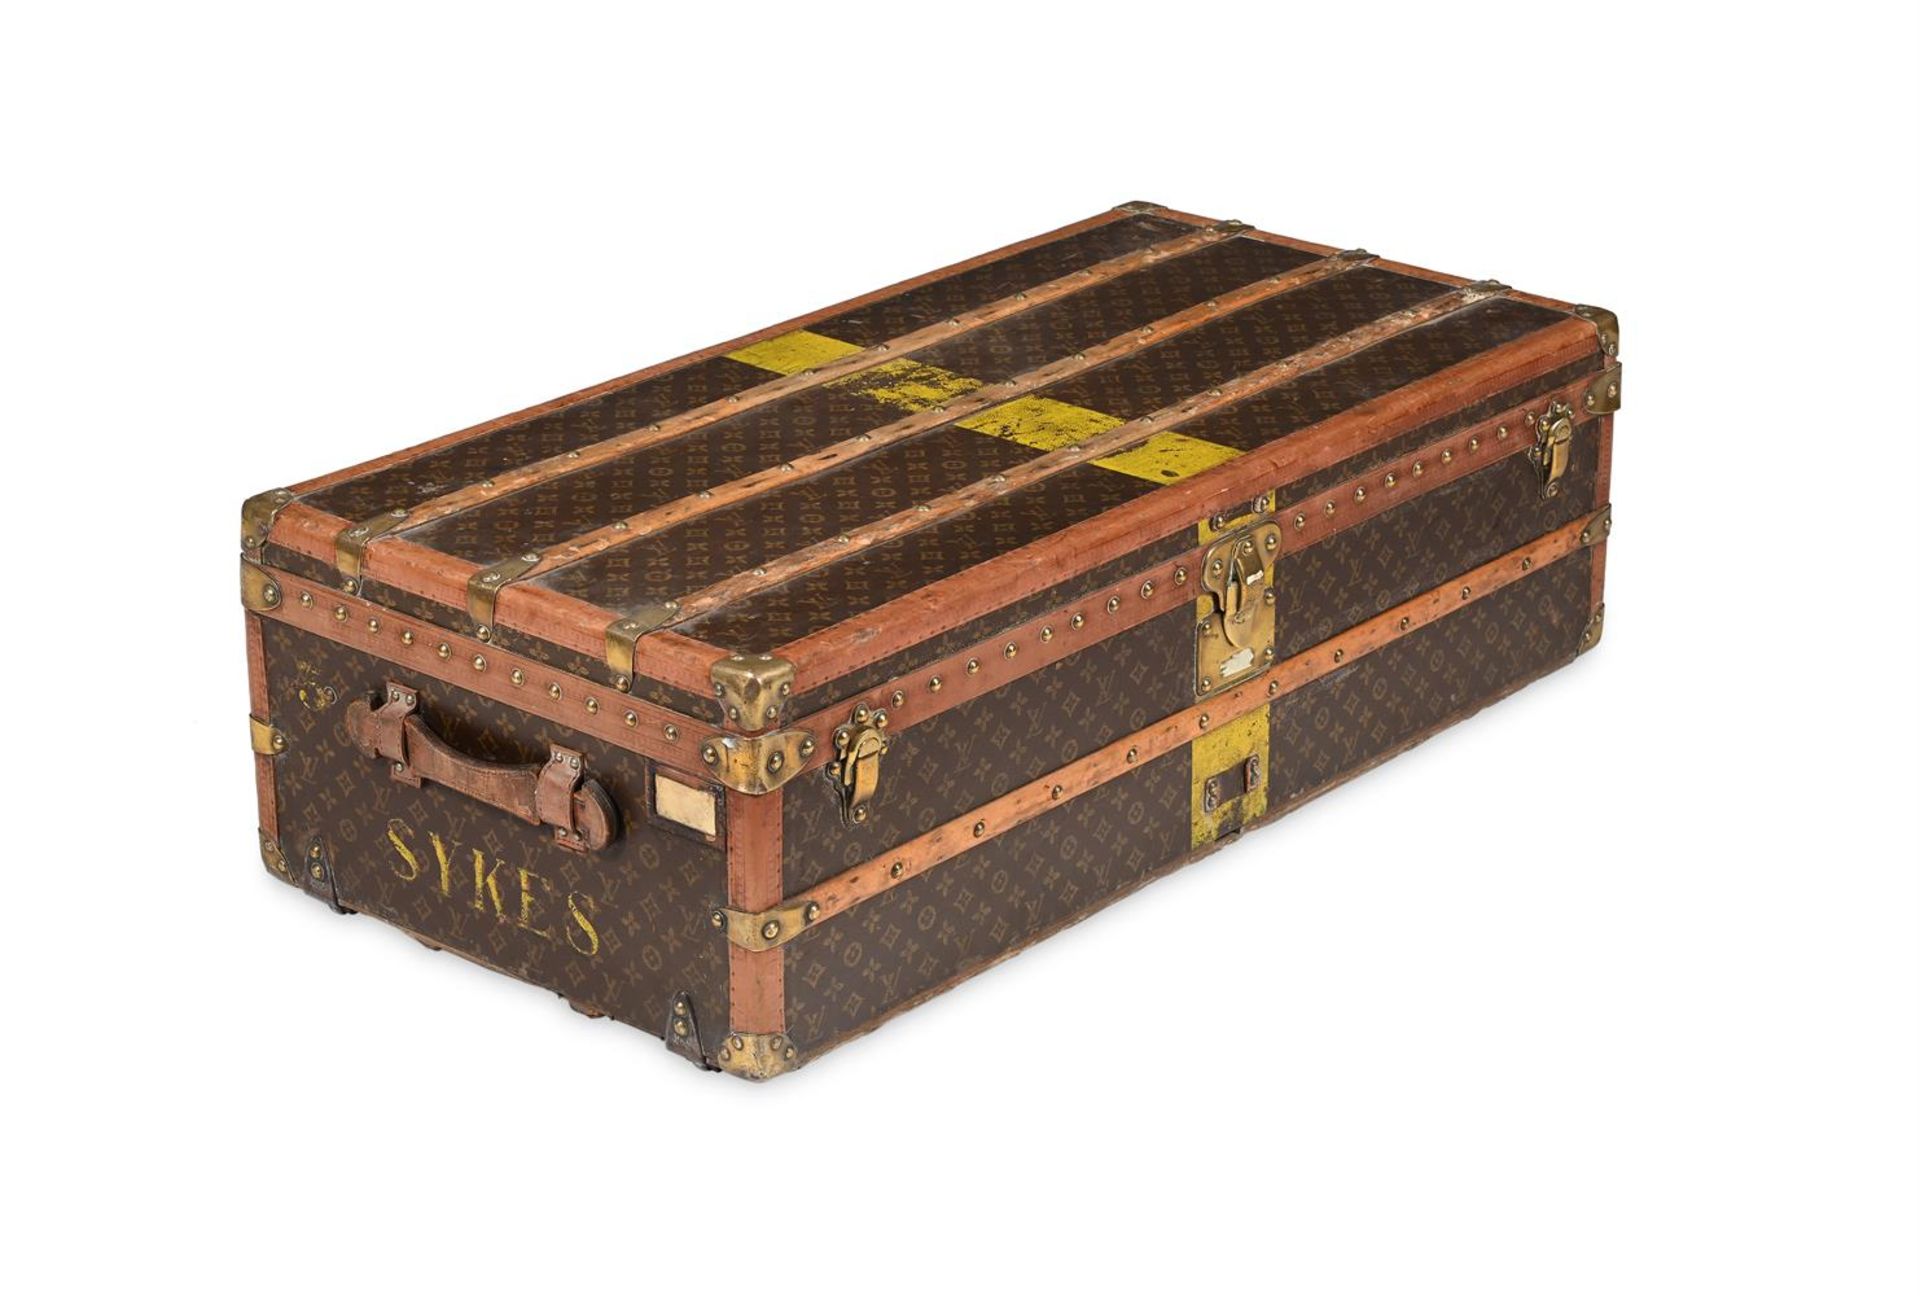 LOUIS VUITTON, A MONOGRAMMED COATED CANVAS HARD TRAVELLING TRUNK - Image 2 of 4